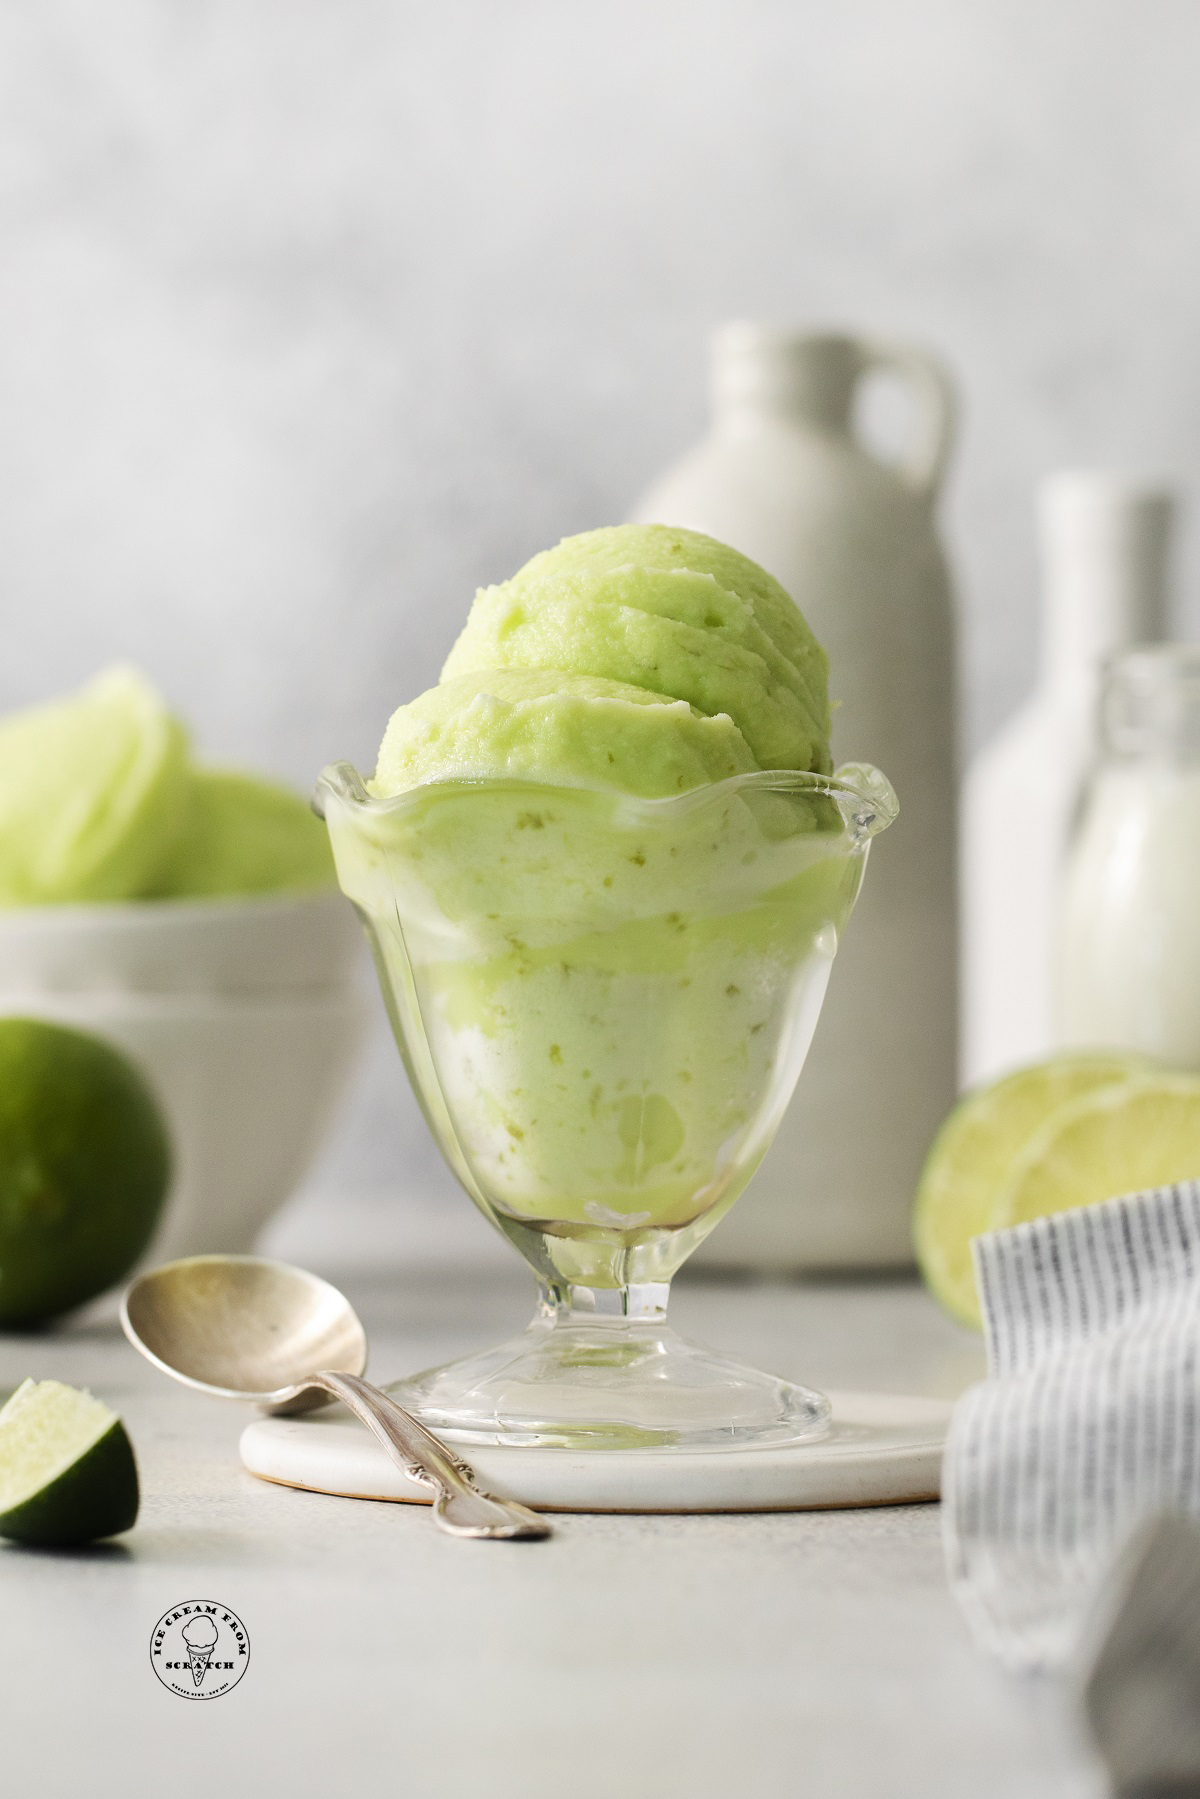 creamy lime sherbet in a footed glass dessert dish.